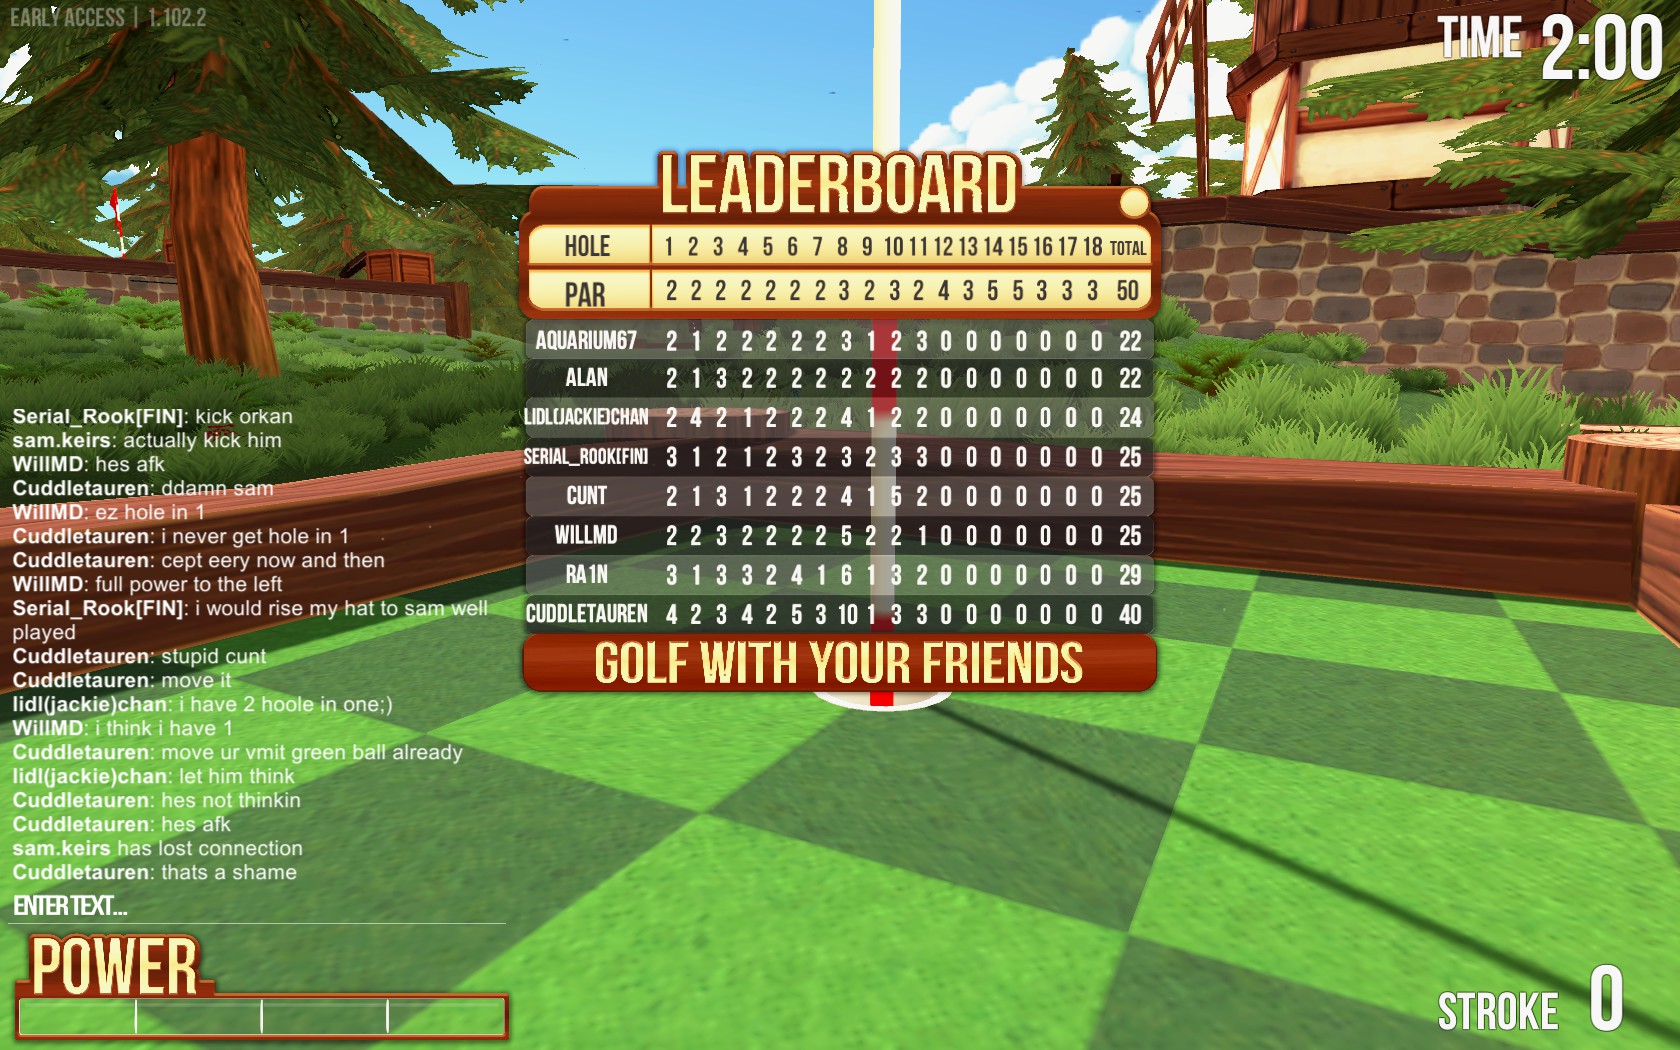 golf with friends pc download free